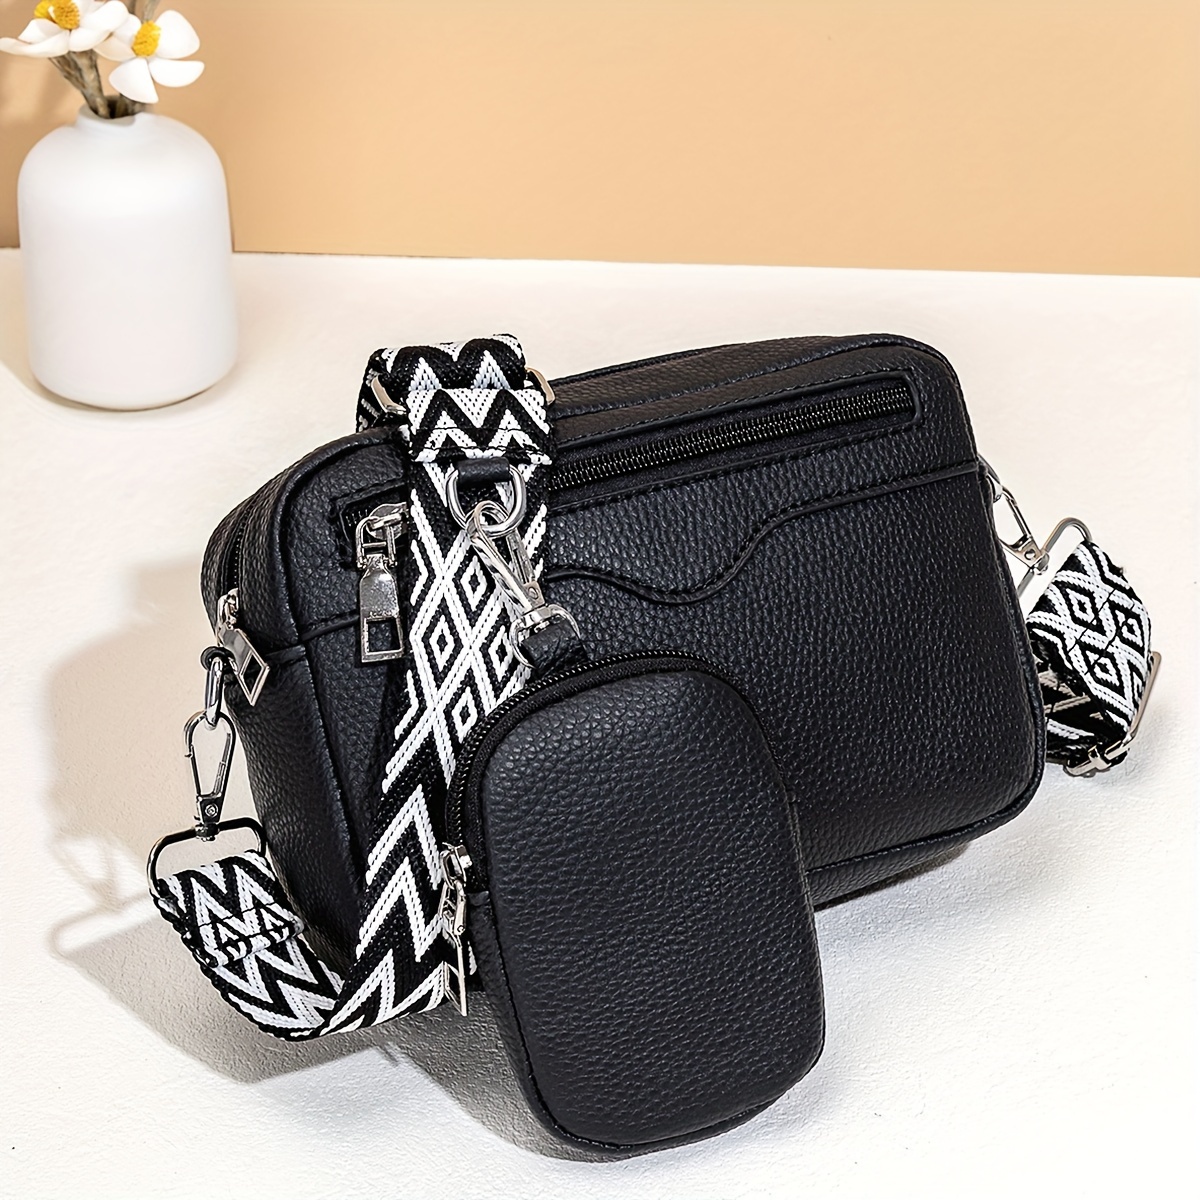 

Women's Crossbody Bag With Adjustable Wide Strap And Coin Purse, Multi-pocket Square Bag With Shoulder Strap, Lipstick Holder, Ideal For Daily Use